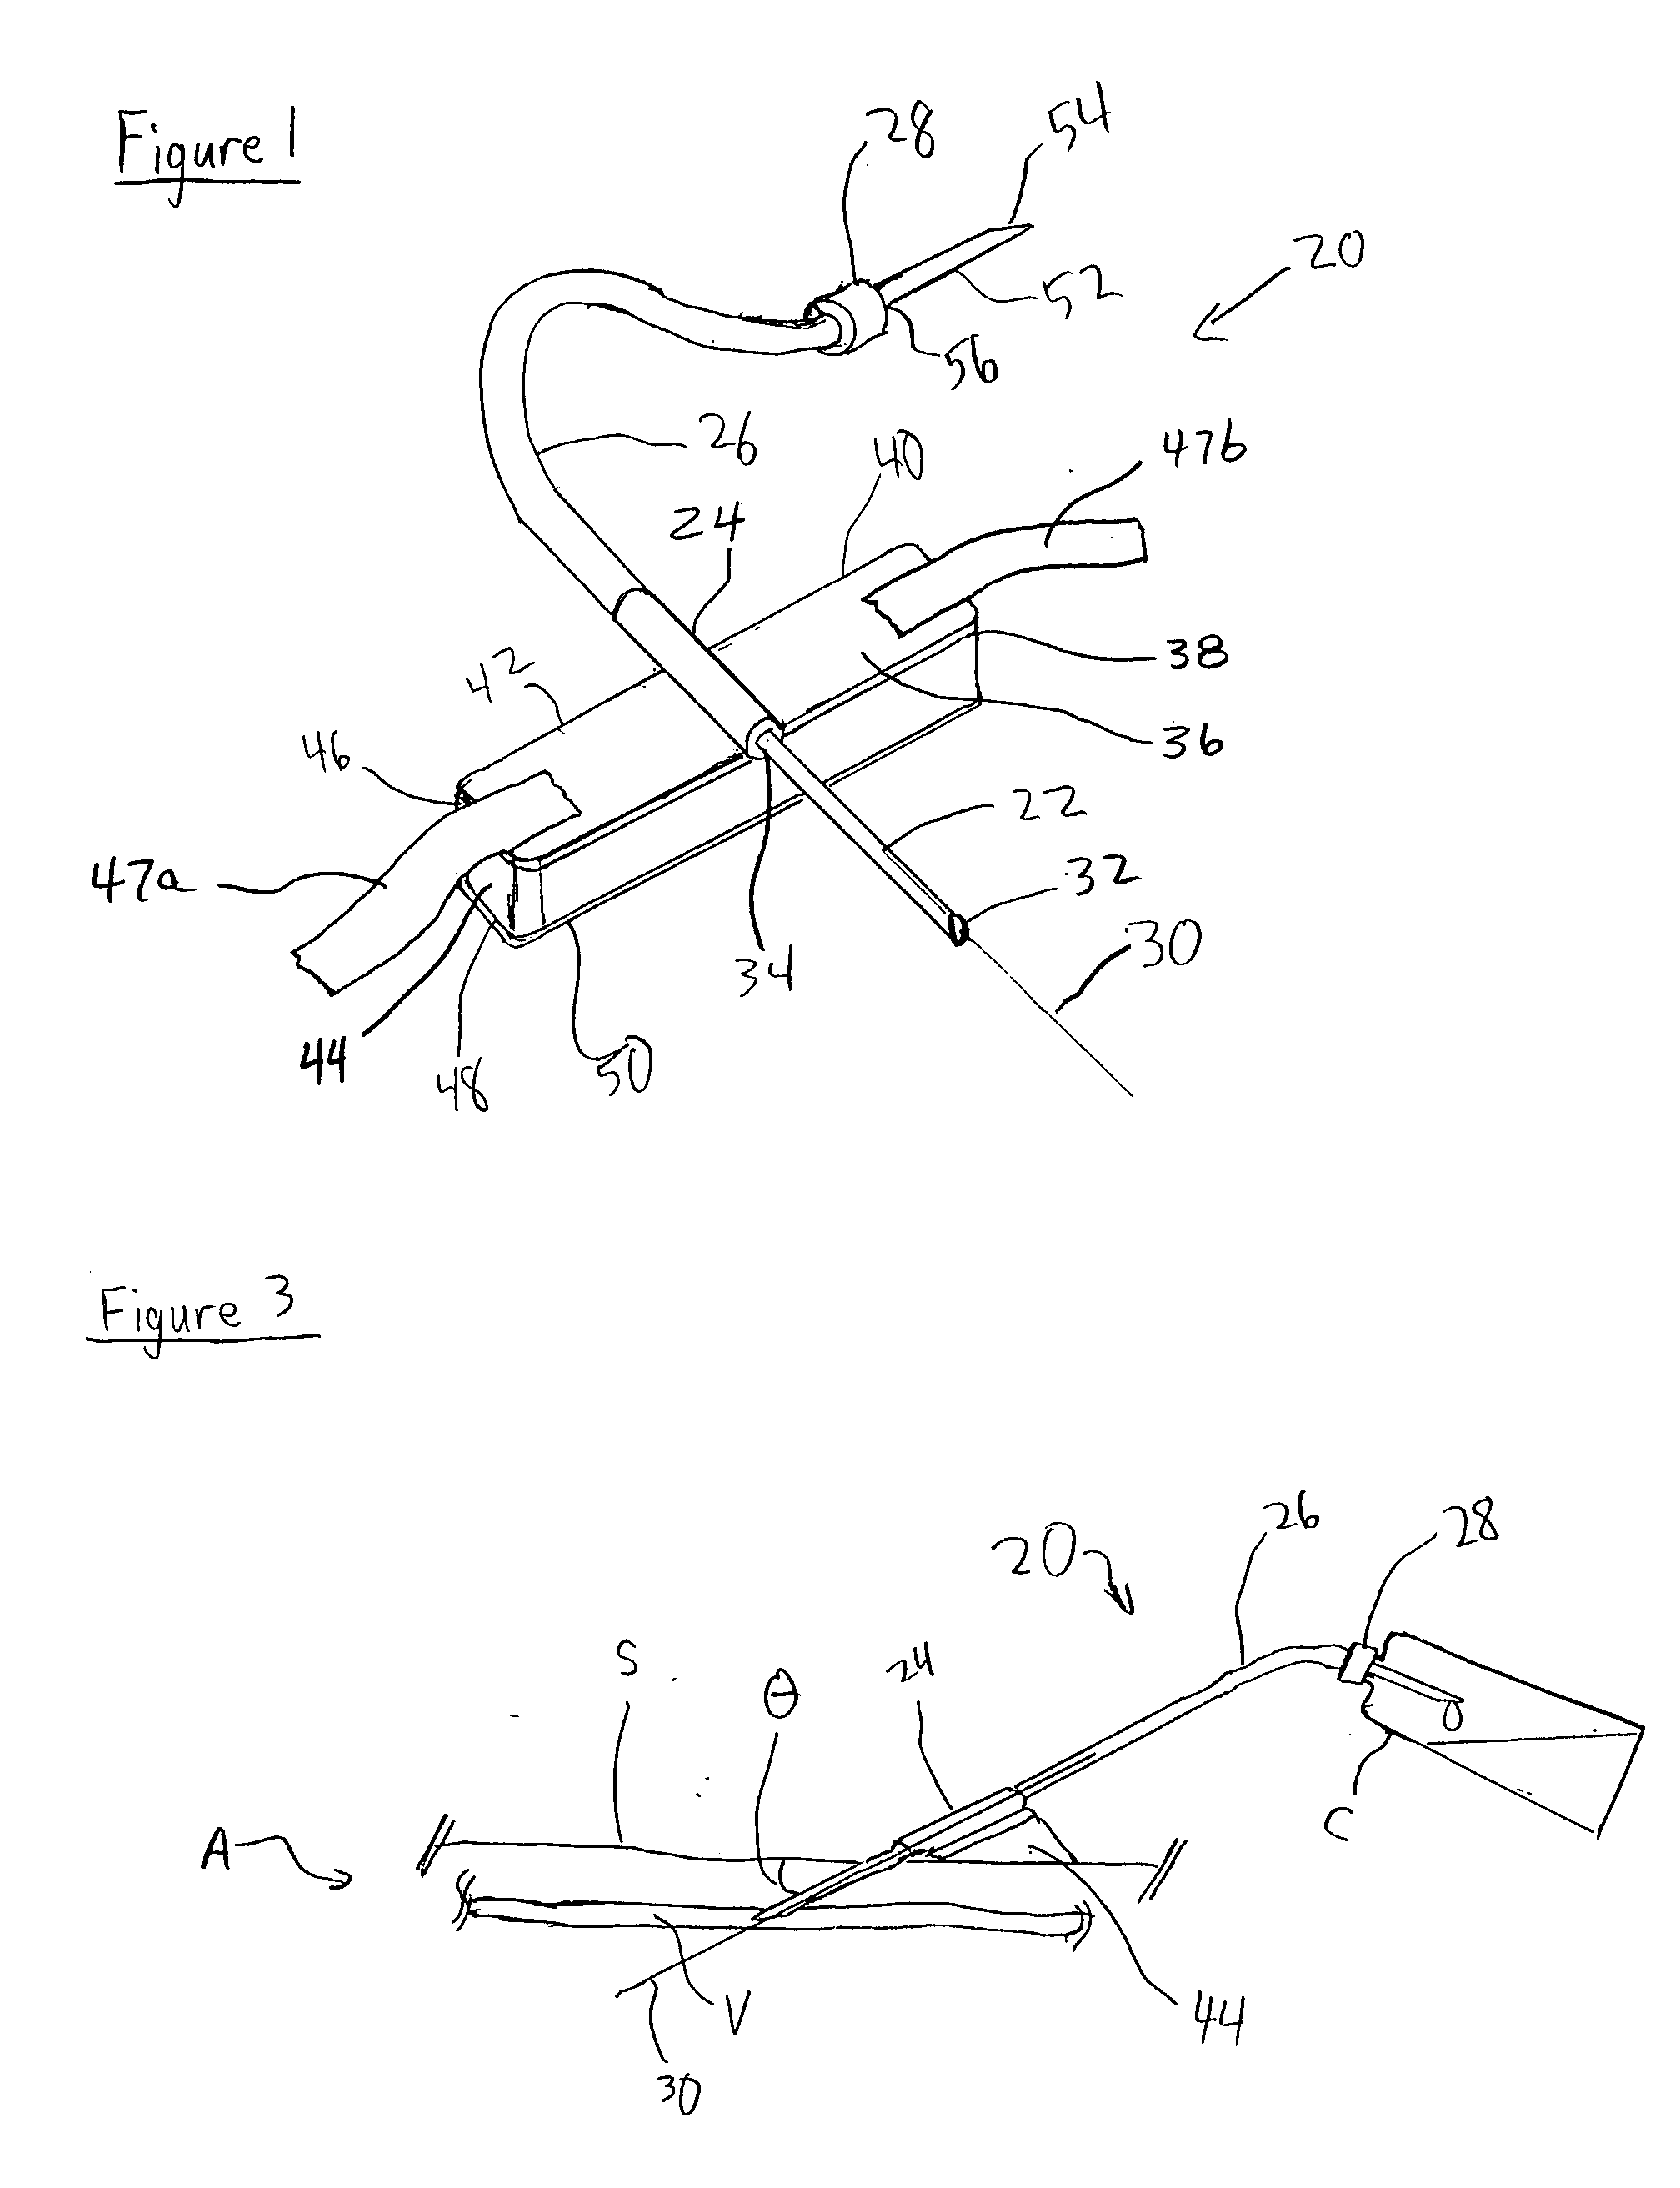 Intravenous needle assembly and method of use